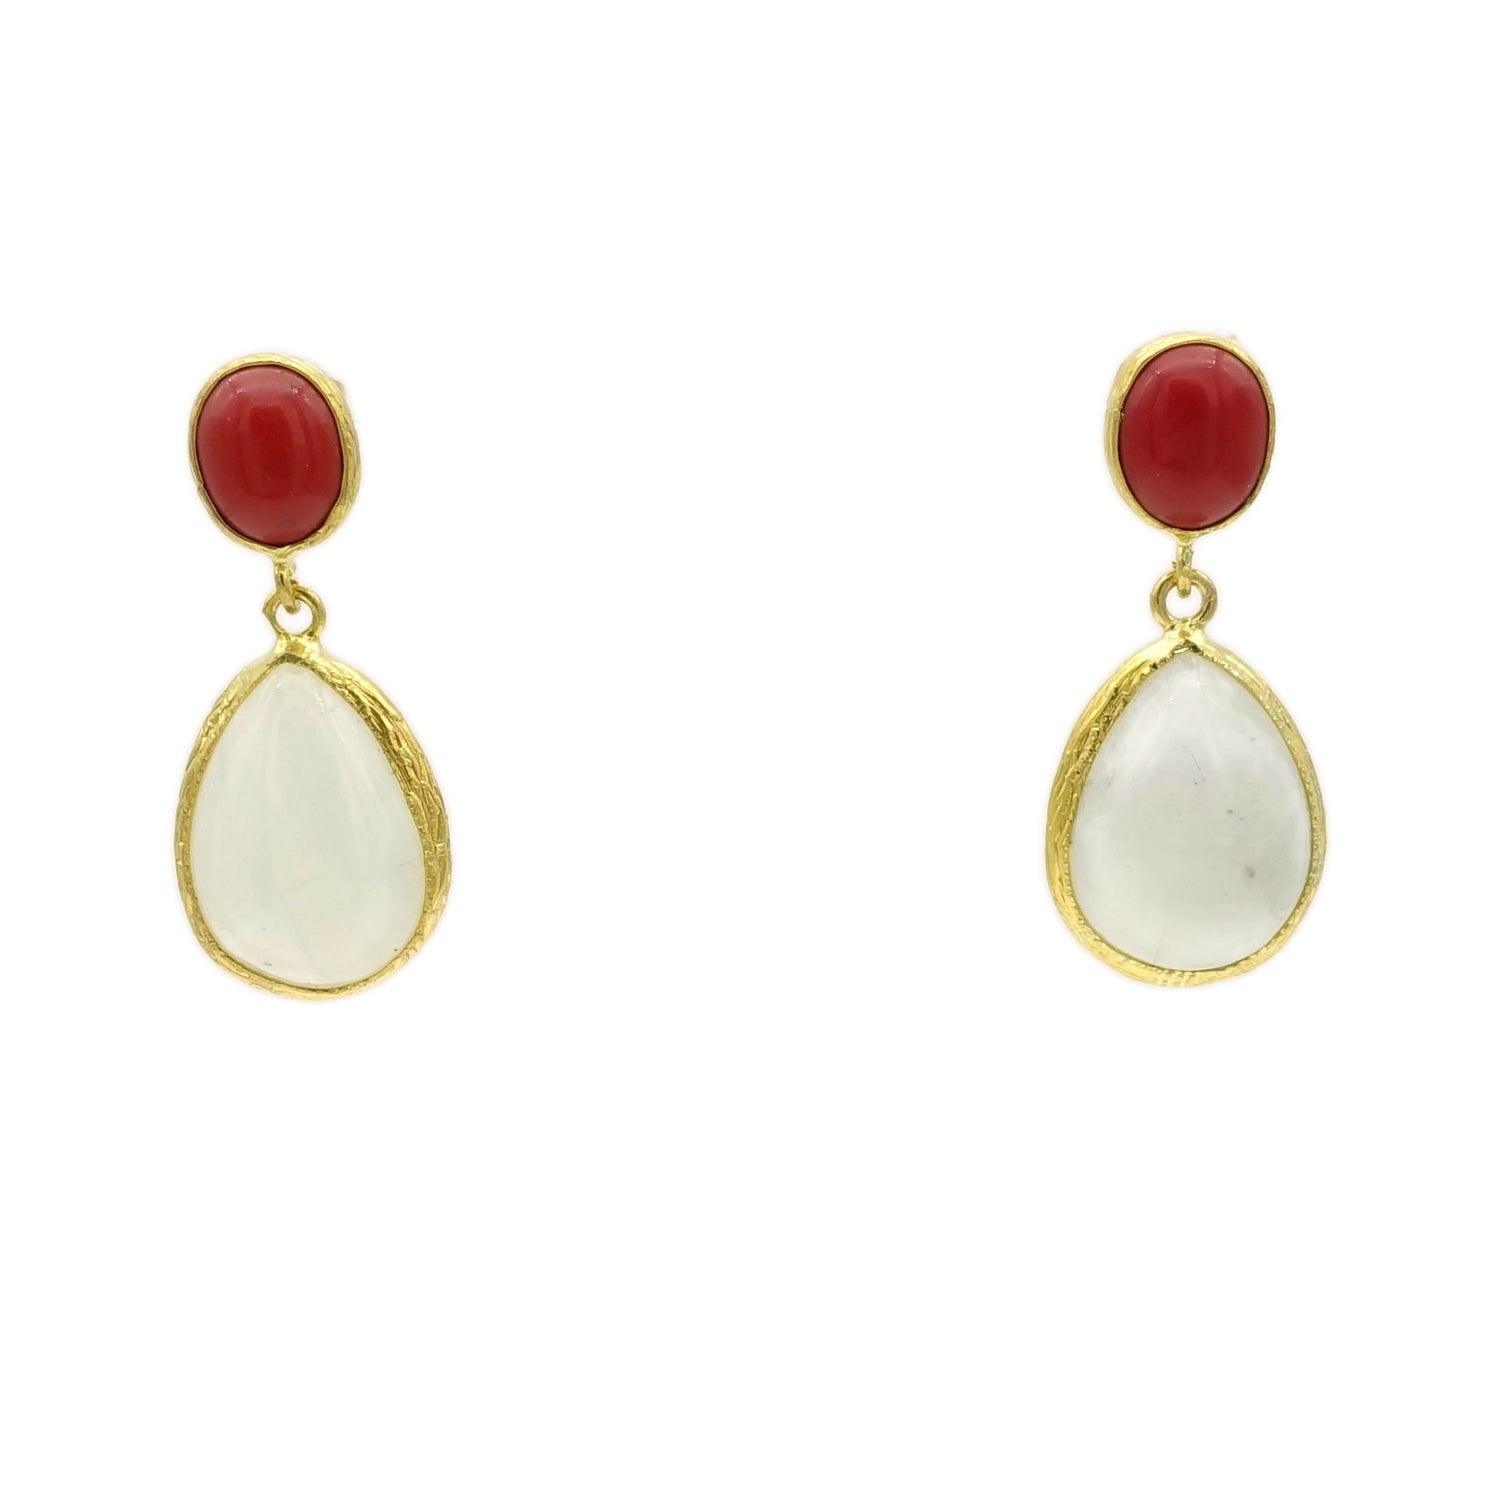 Aylas Moon stone, Red Coral earrings - 21ct Gold plated semi precious gemstone - Handmade in Ottoman Style by Artisan